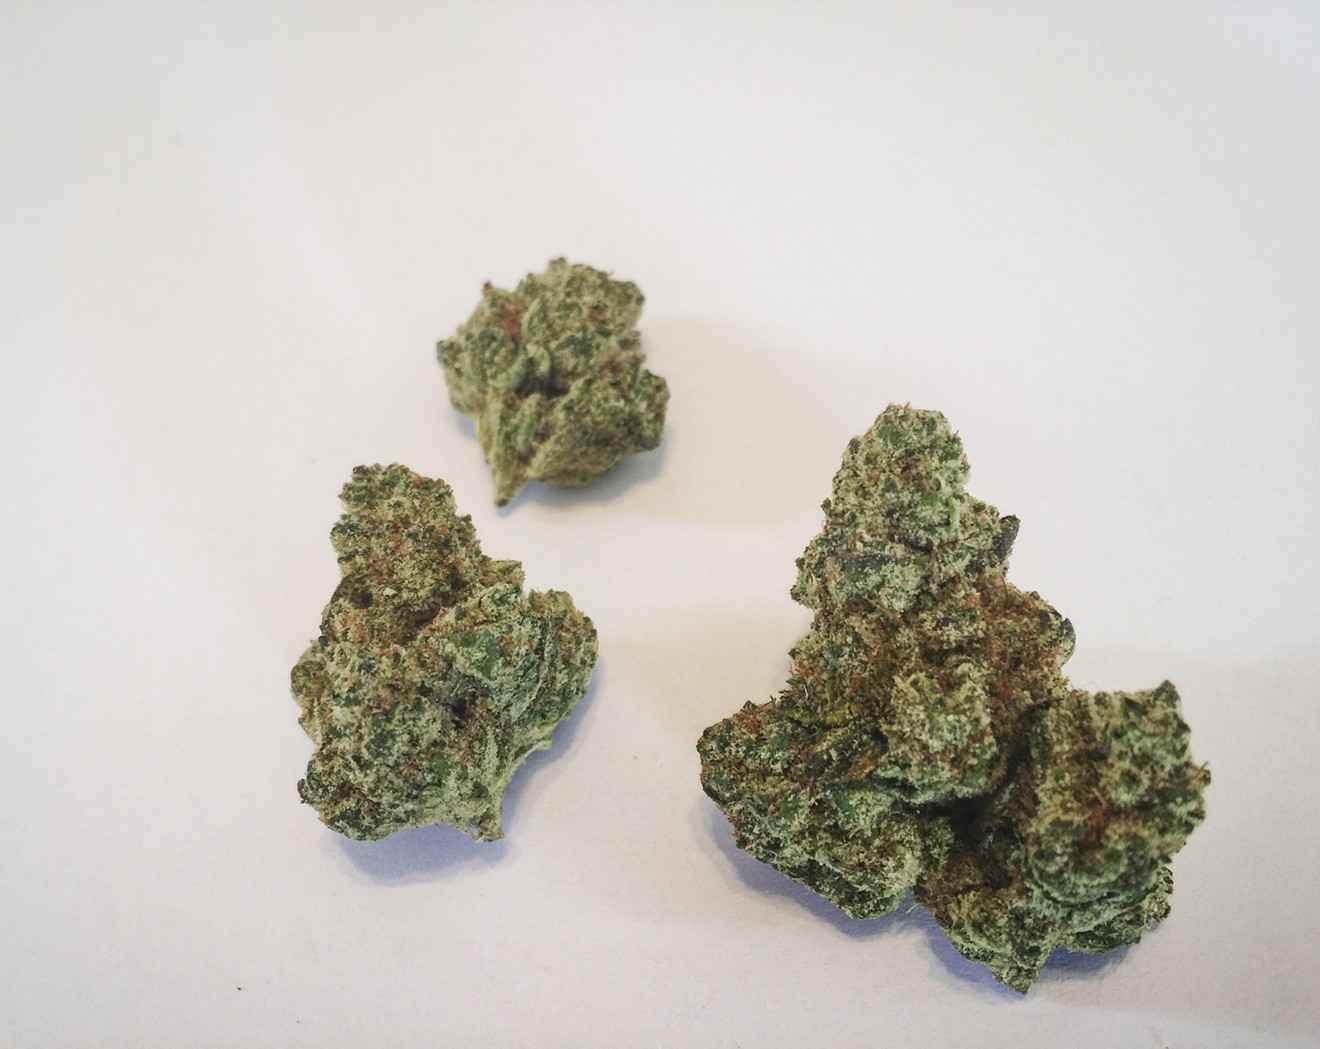 Get squared away with Triangle Kush.